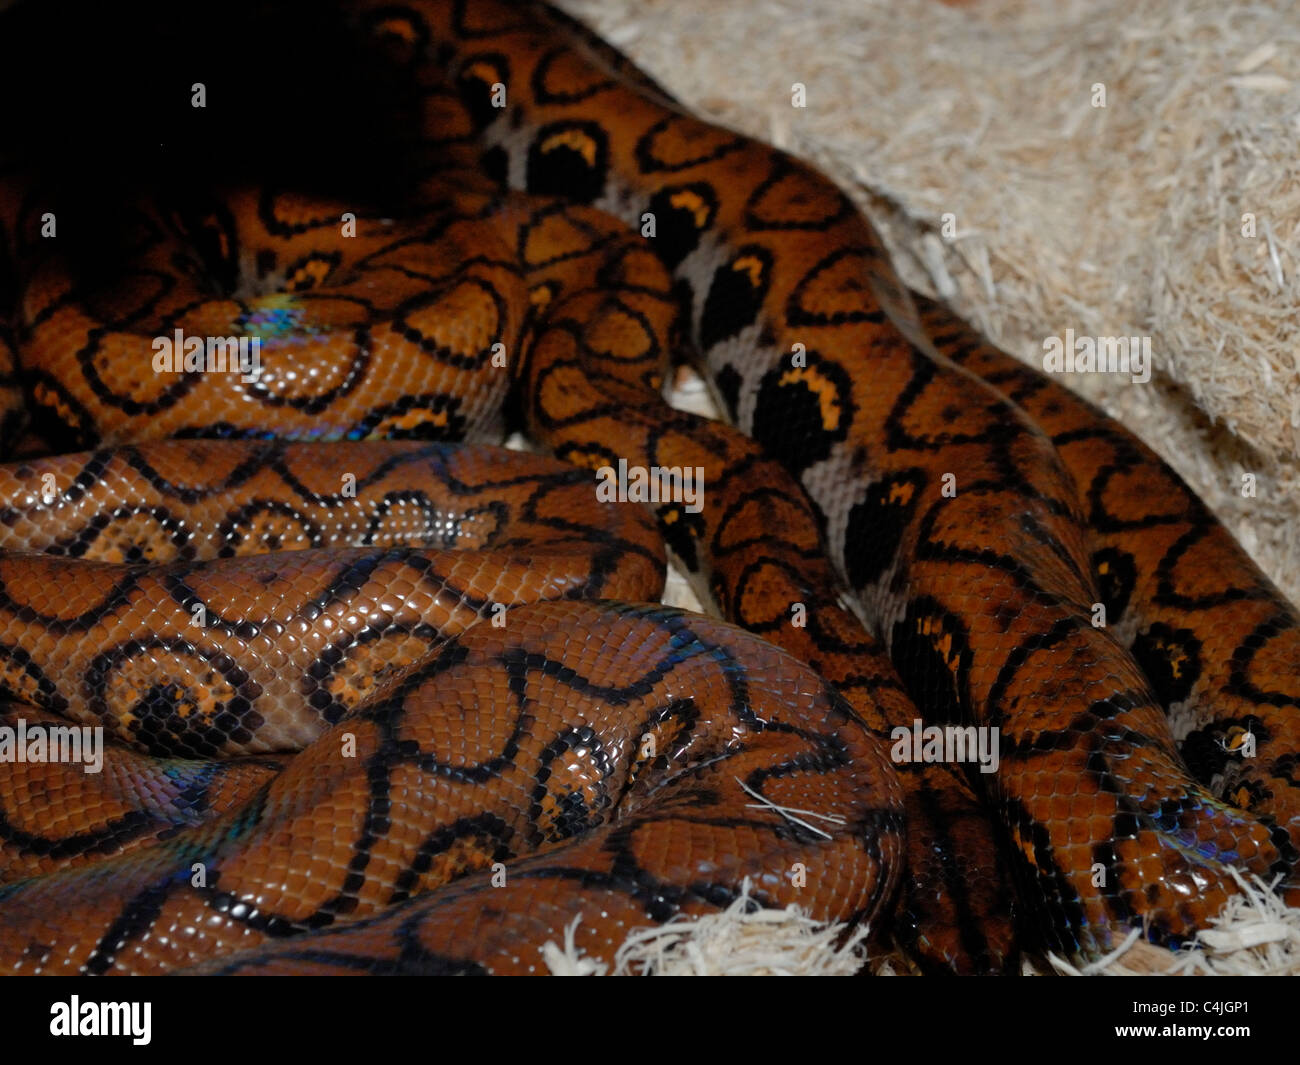 Two Rainbow Pythons coiled. Stock Photo